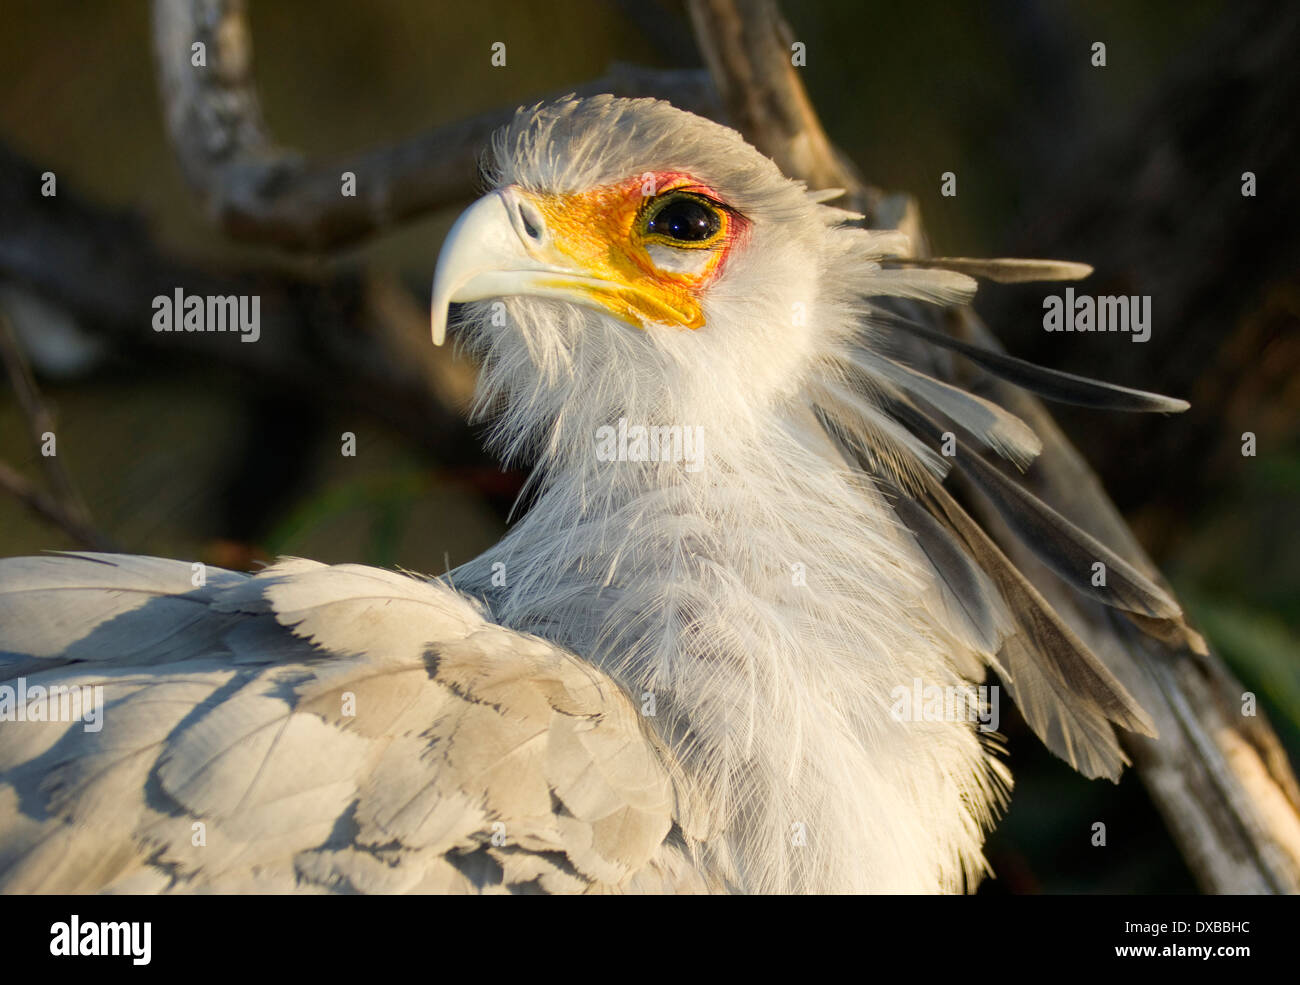 Large bird called Secretary looks back with the sun in his eye Stock Photo